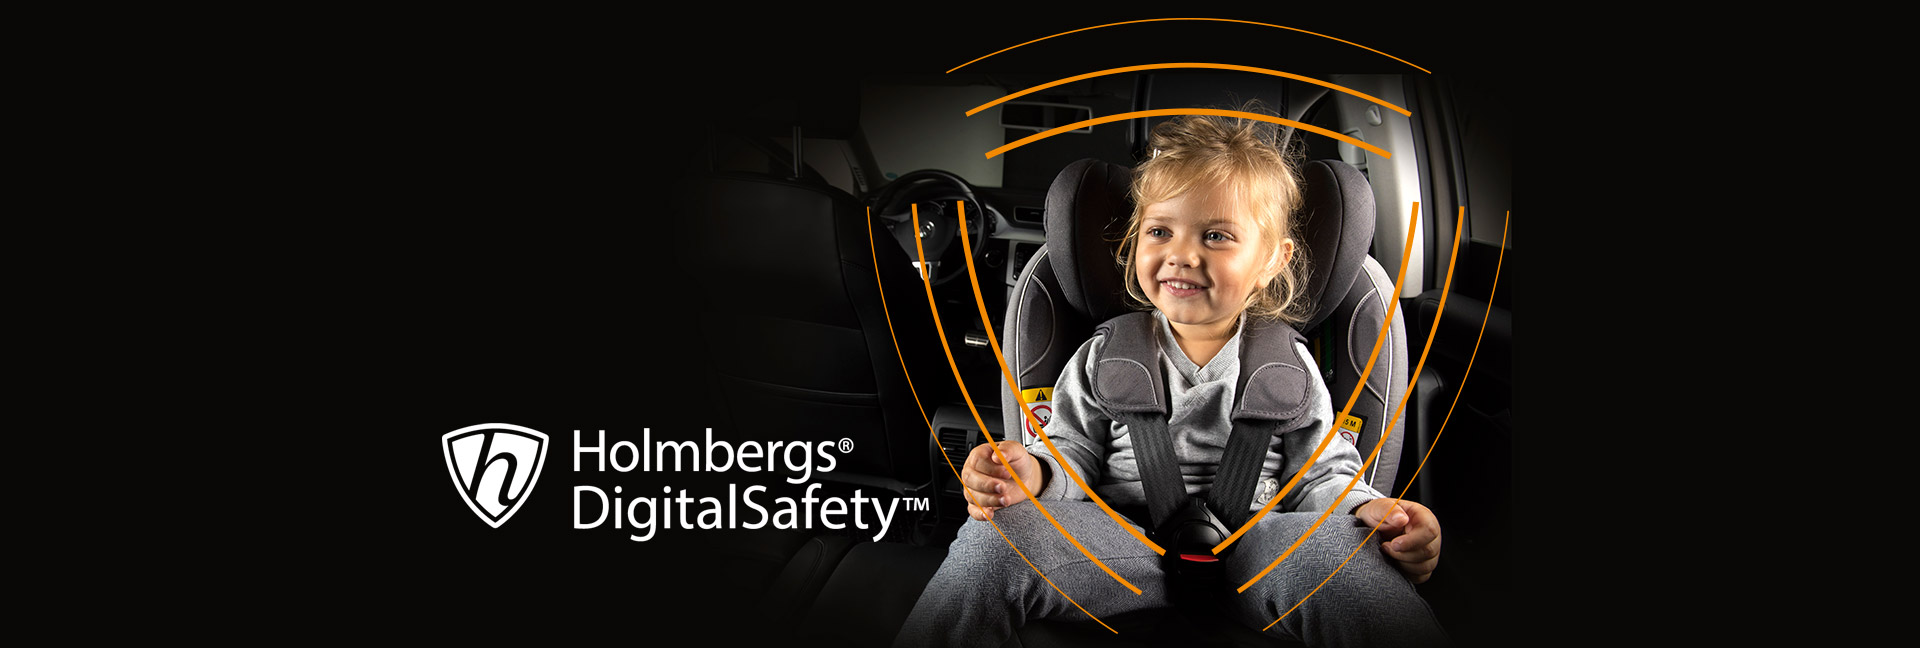 DigitalSafety connected child seat system